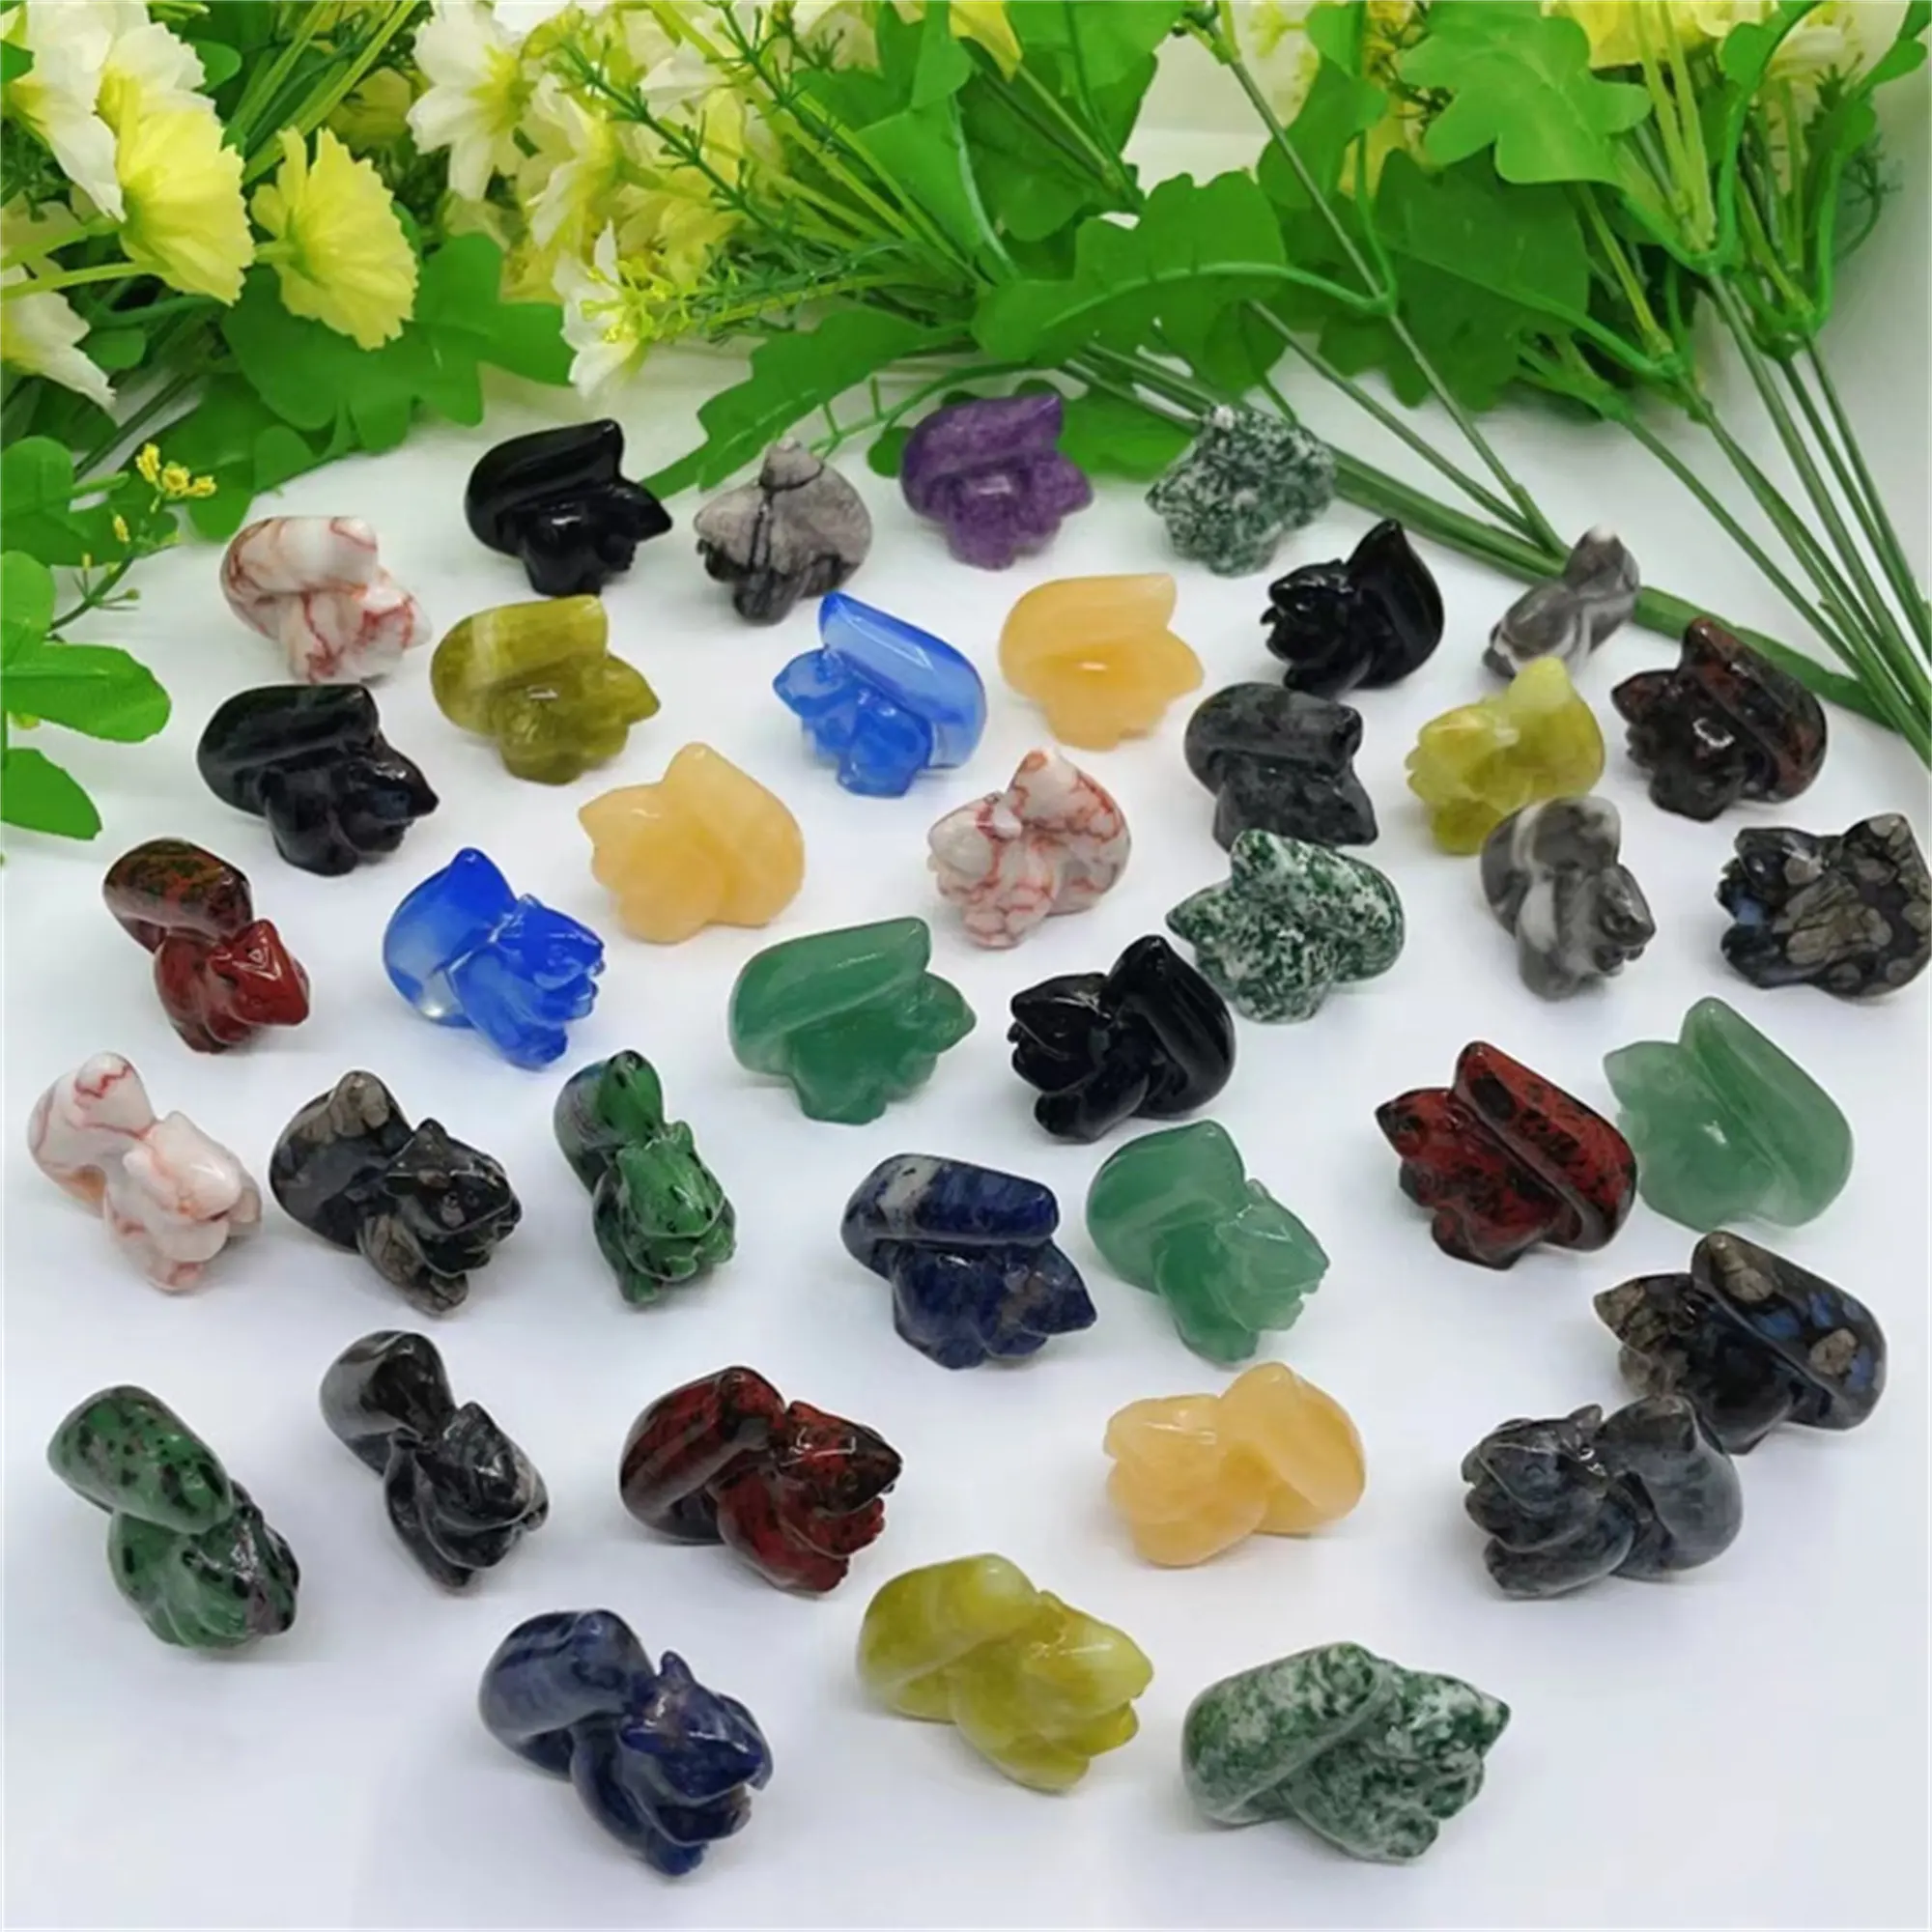 Wholesale crystal small animals Natural healing products stone craft squirrels feng shui